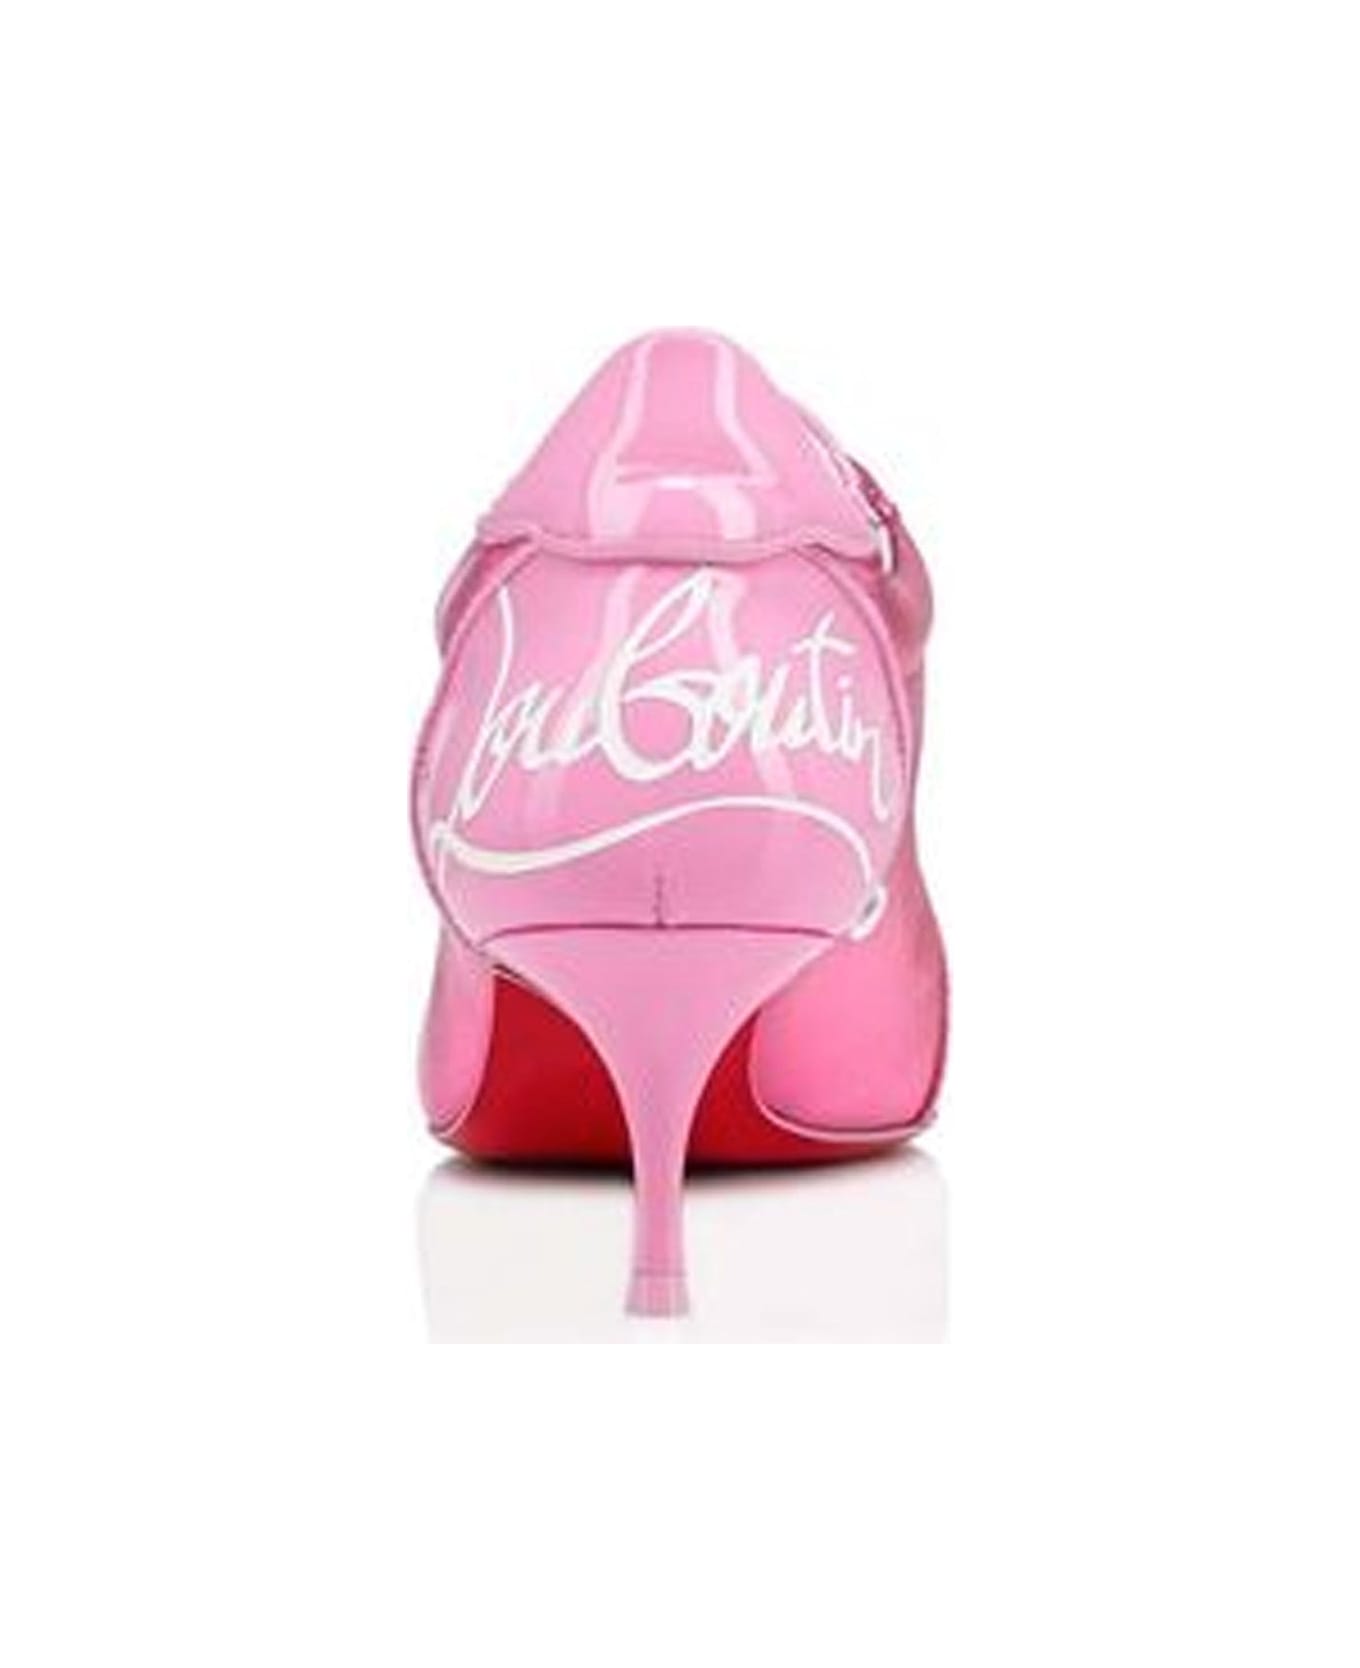 Christian Louboutin Leather Pumps - Pink ハイヒール